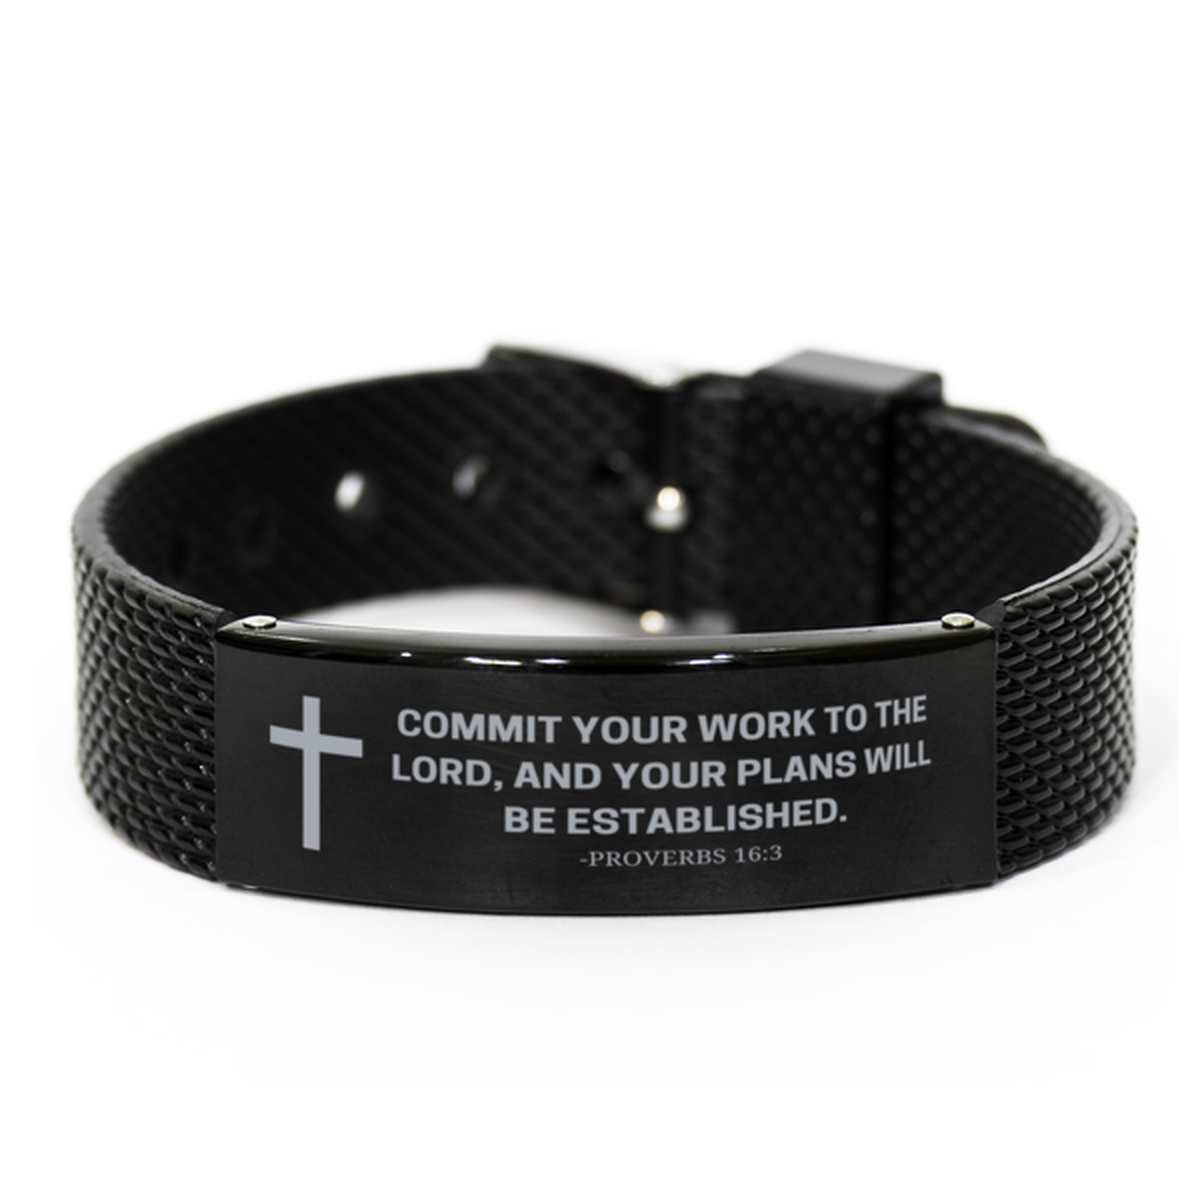 Baptism Gifts For Teenage Boys Girls, Christian Bible Verse Black Shark Mesh Bracelet, Commit your work to the Lord, Catholic Confirmation Gifts for Son, Godson, Grandson, Nephew